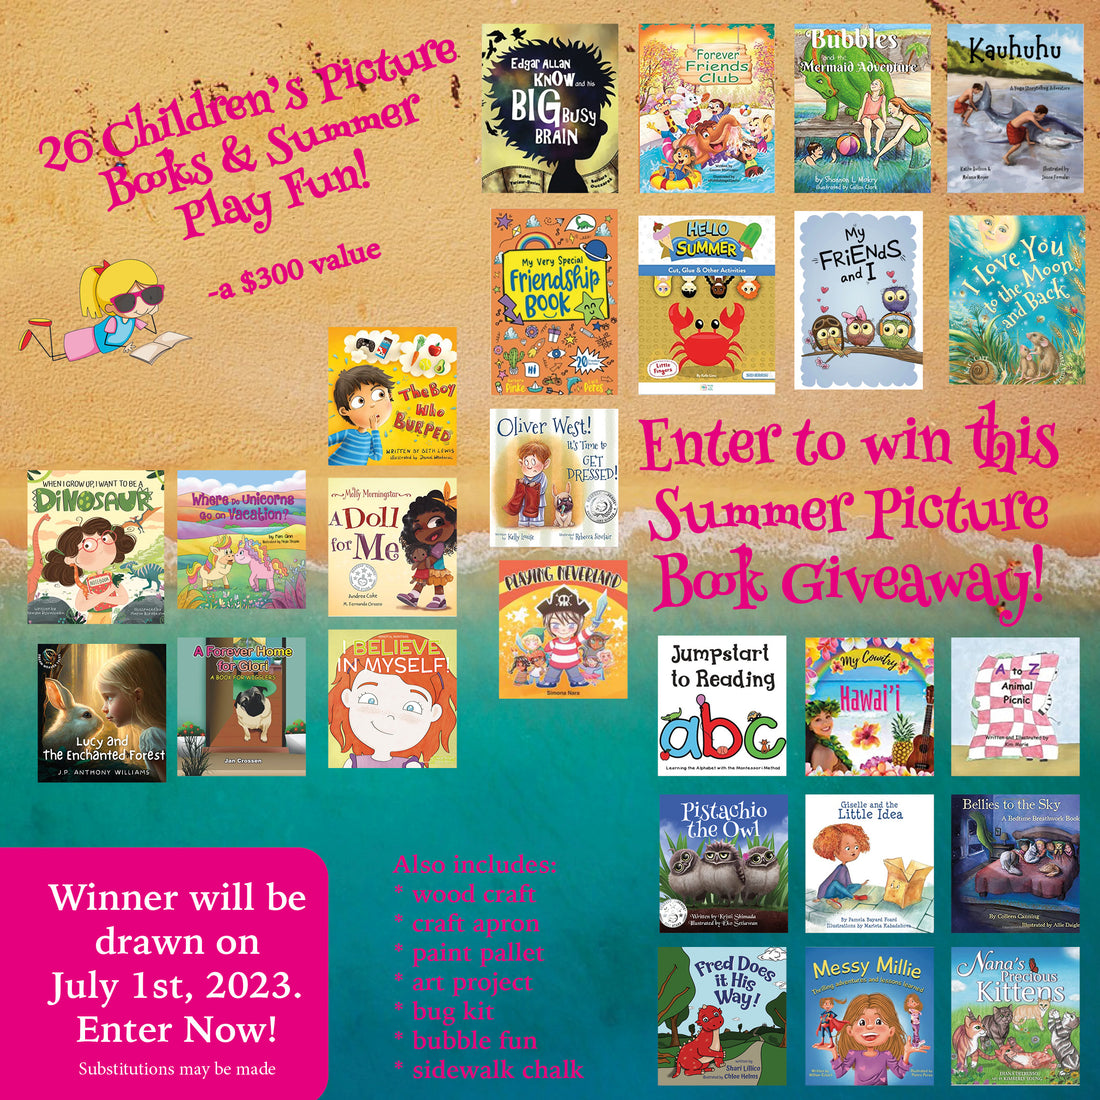 You now have the incredible opportunity to win 26 fantastic picture books and fun crafts in the Summer Picture Book Giveaway!